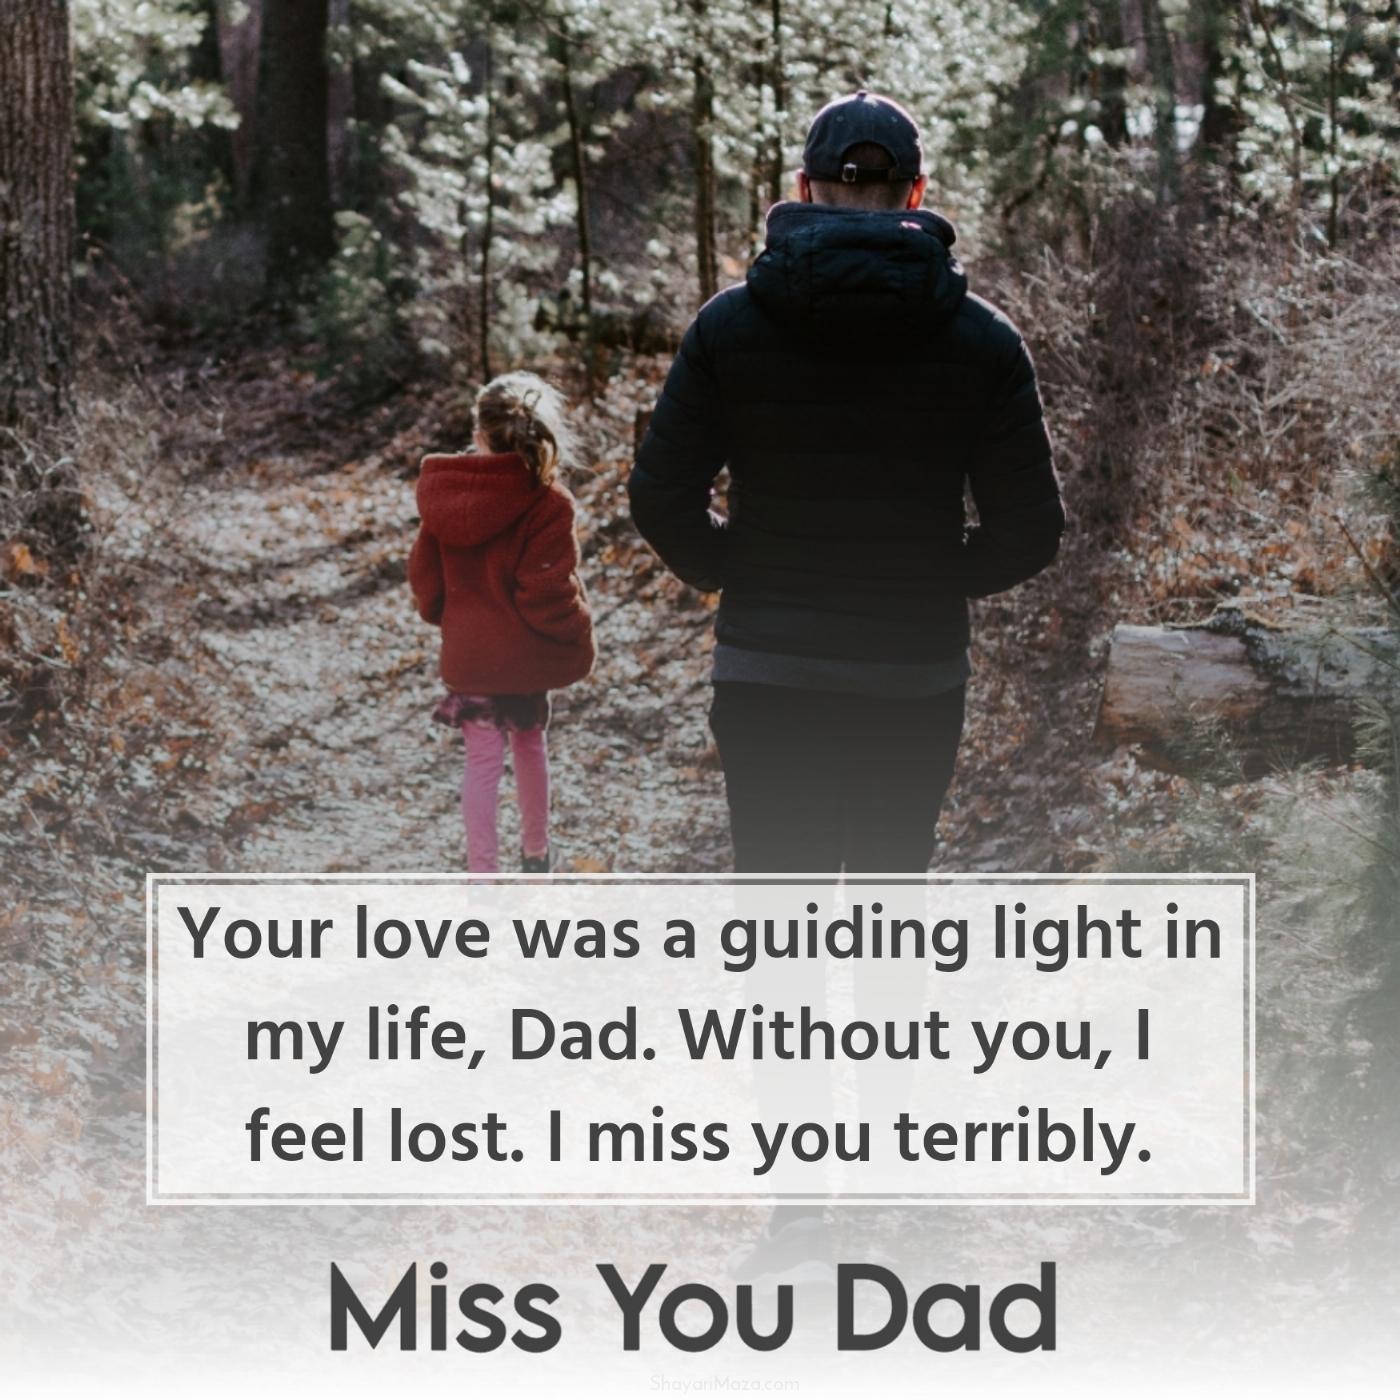 Your love was a guiding light in my life Dad